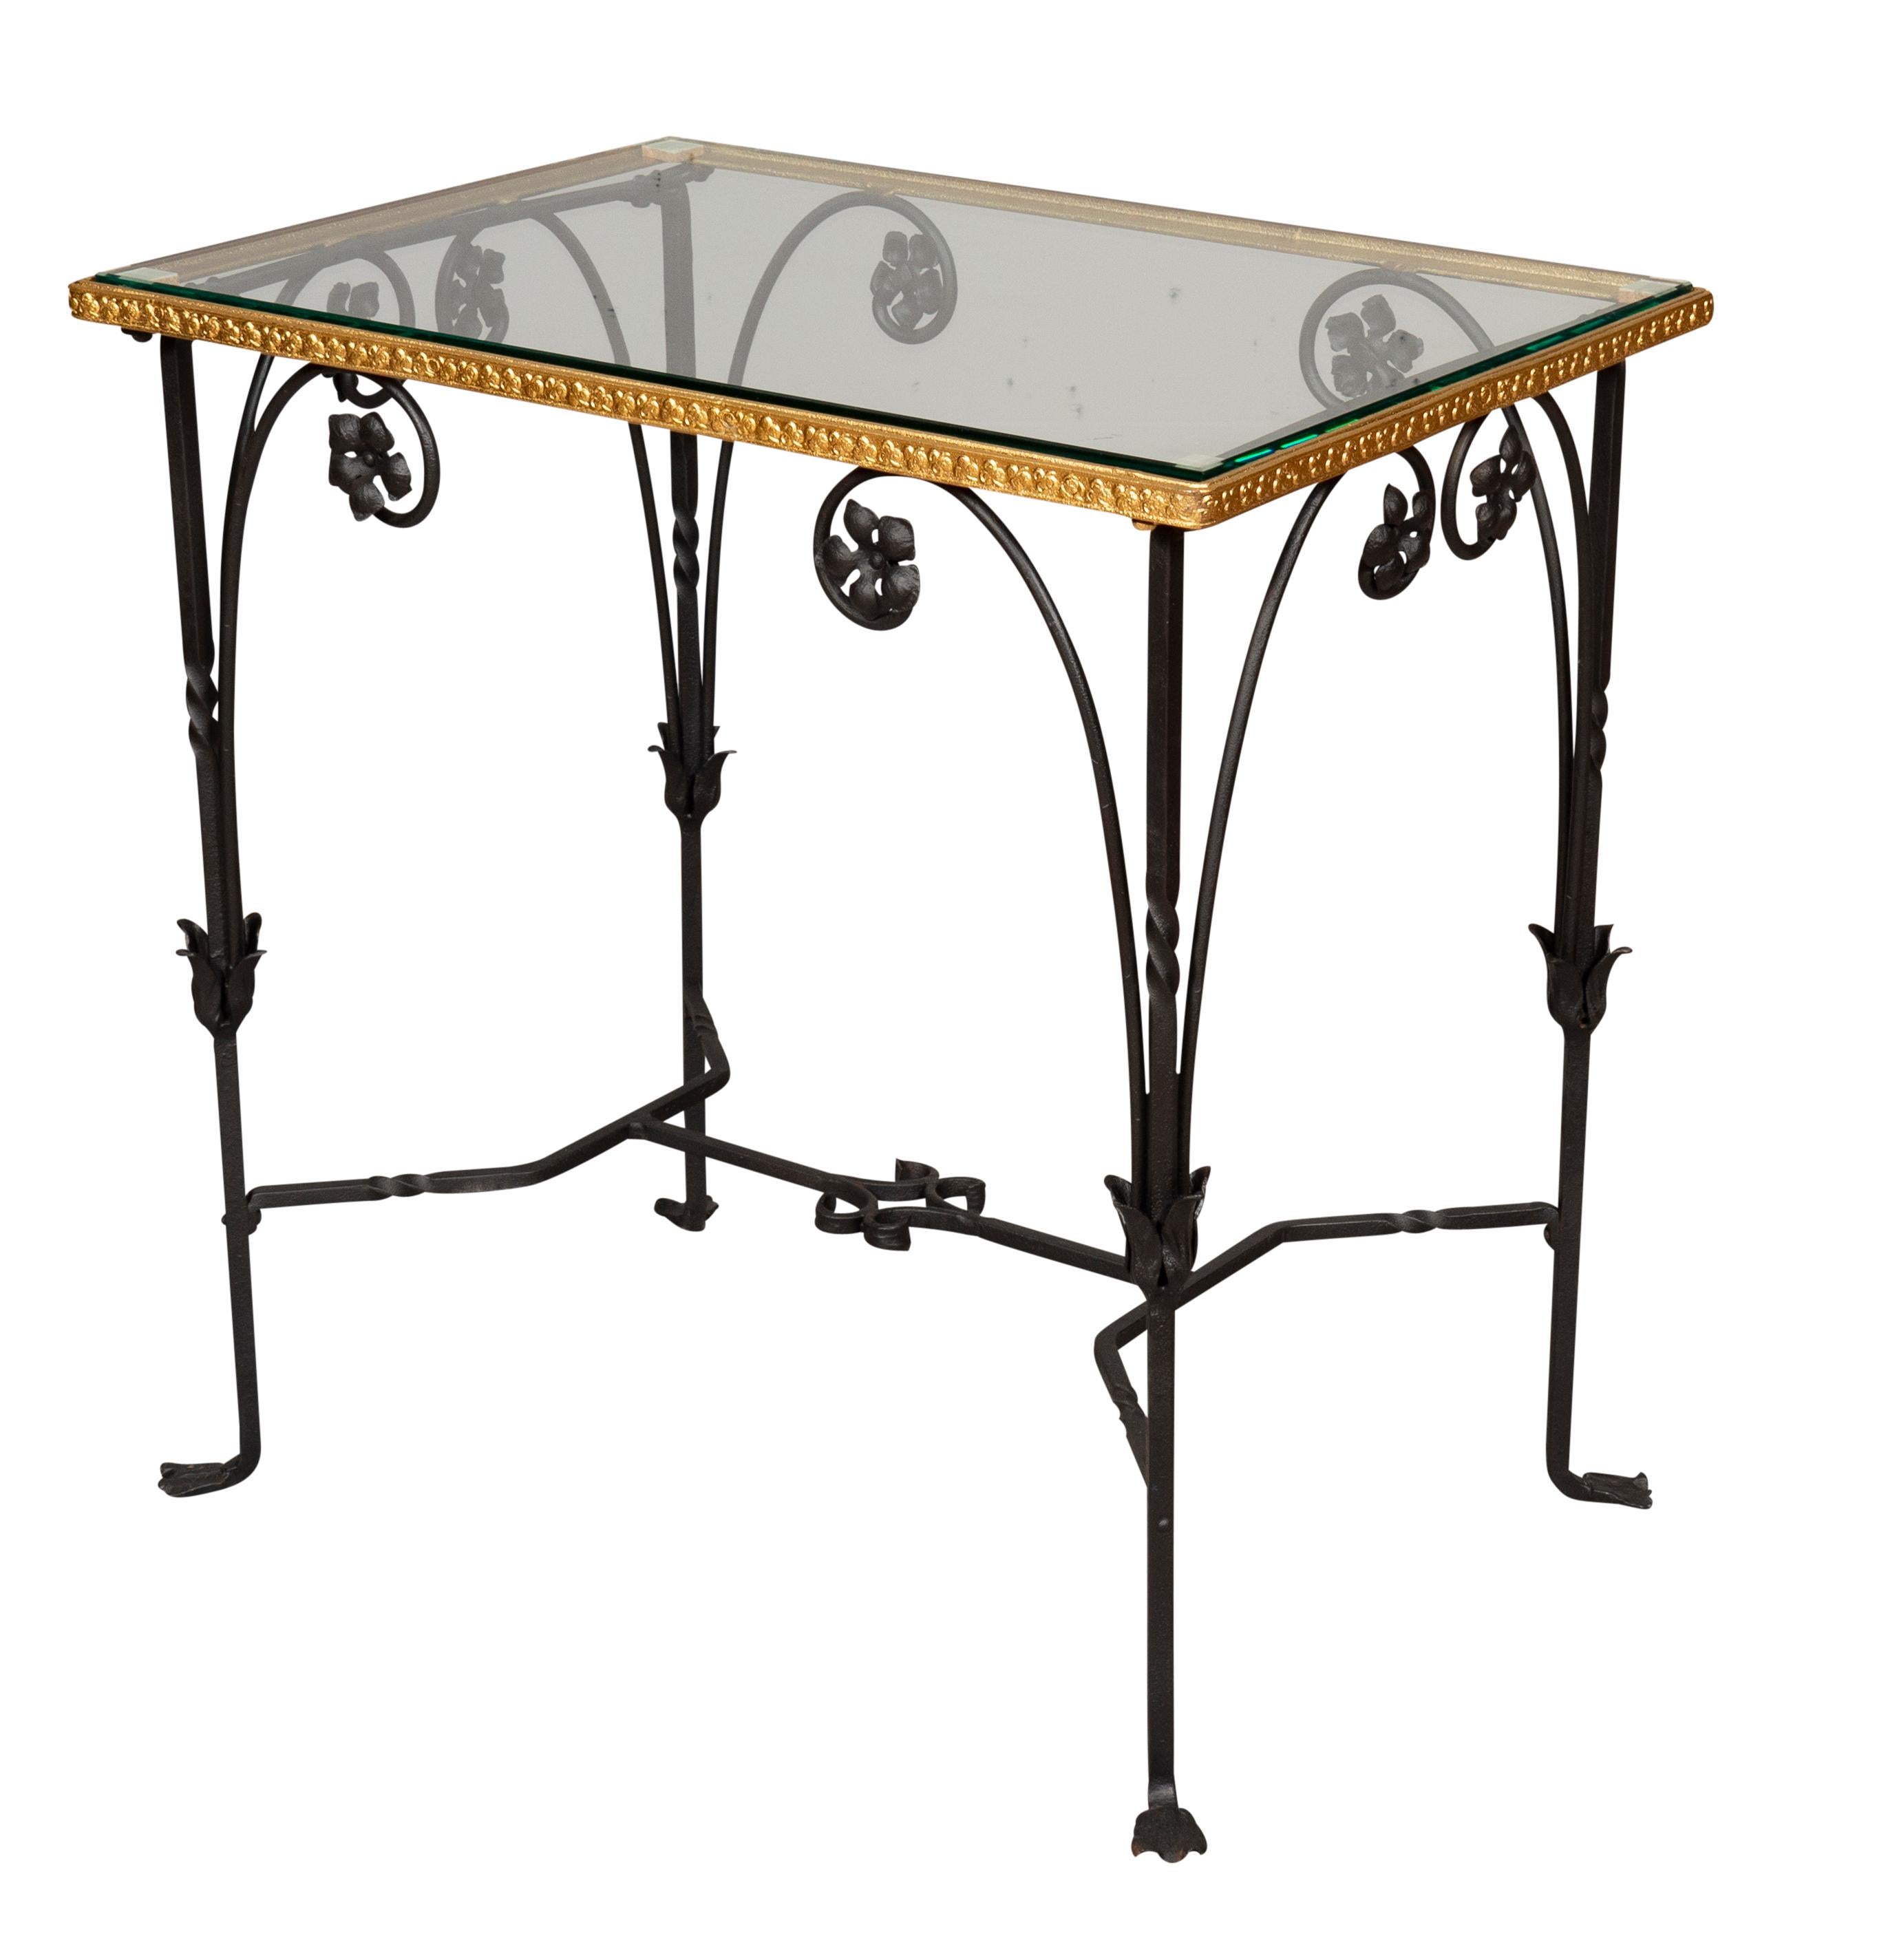 Painted Arts and Crafts Wrought Iron Table